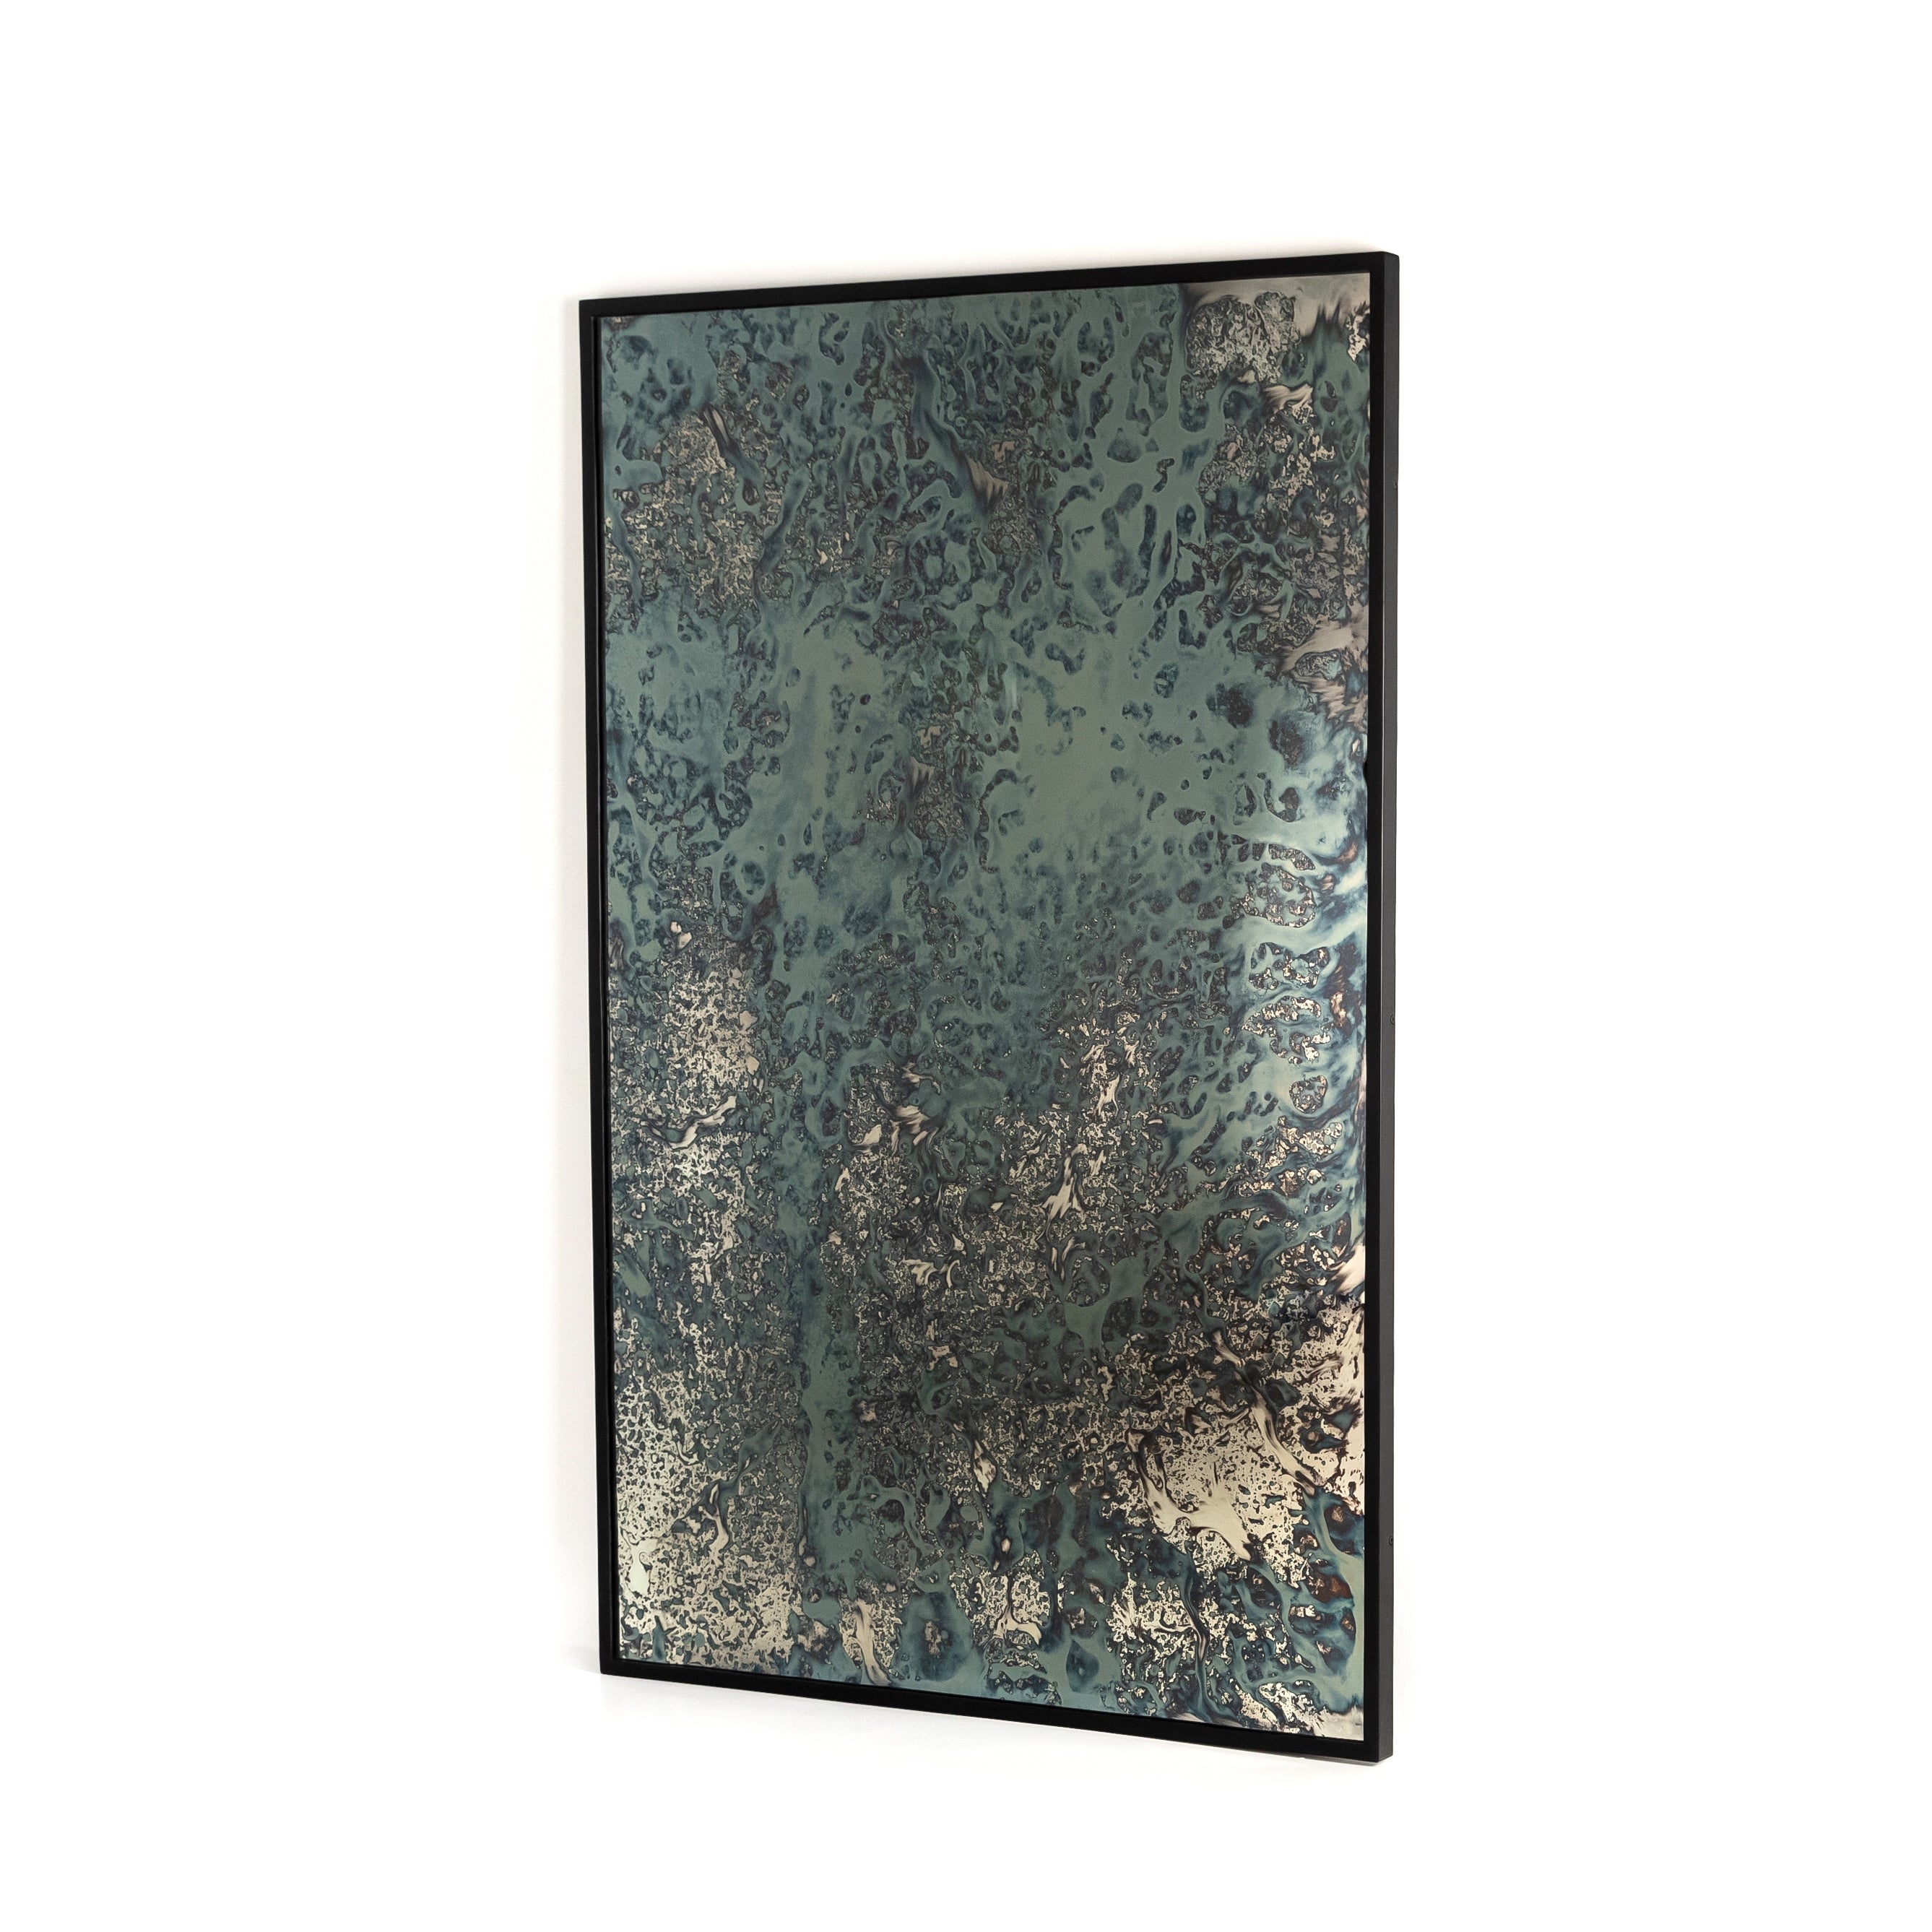 We love the artistic reflection of this Acid Wash Floor Mirror - Iron Matte Black. Black-finished iron forms a clean, rectangular frame for acid-washed mirror with hand-painted blue hues - your new favorite mirror for any room!  Overall Dimensions: 53.50"w x 1.50"d x 80.50"h